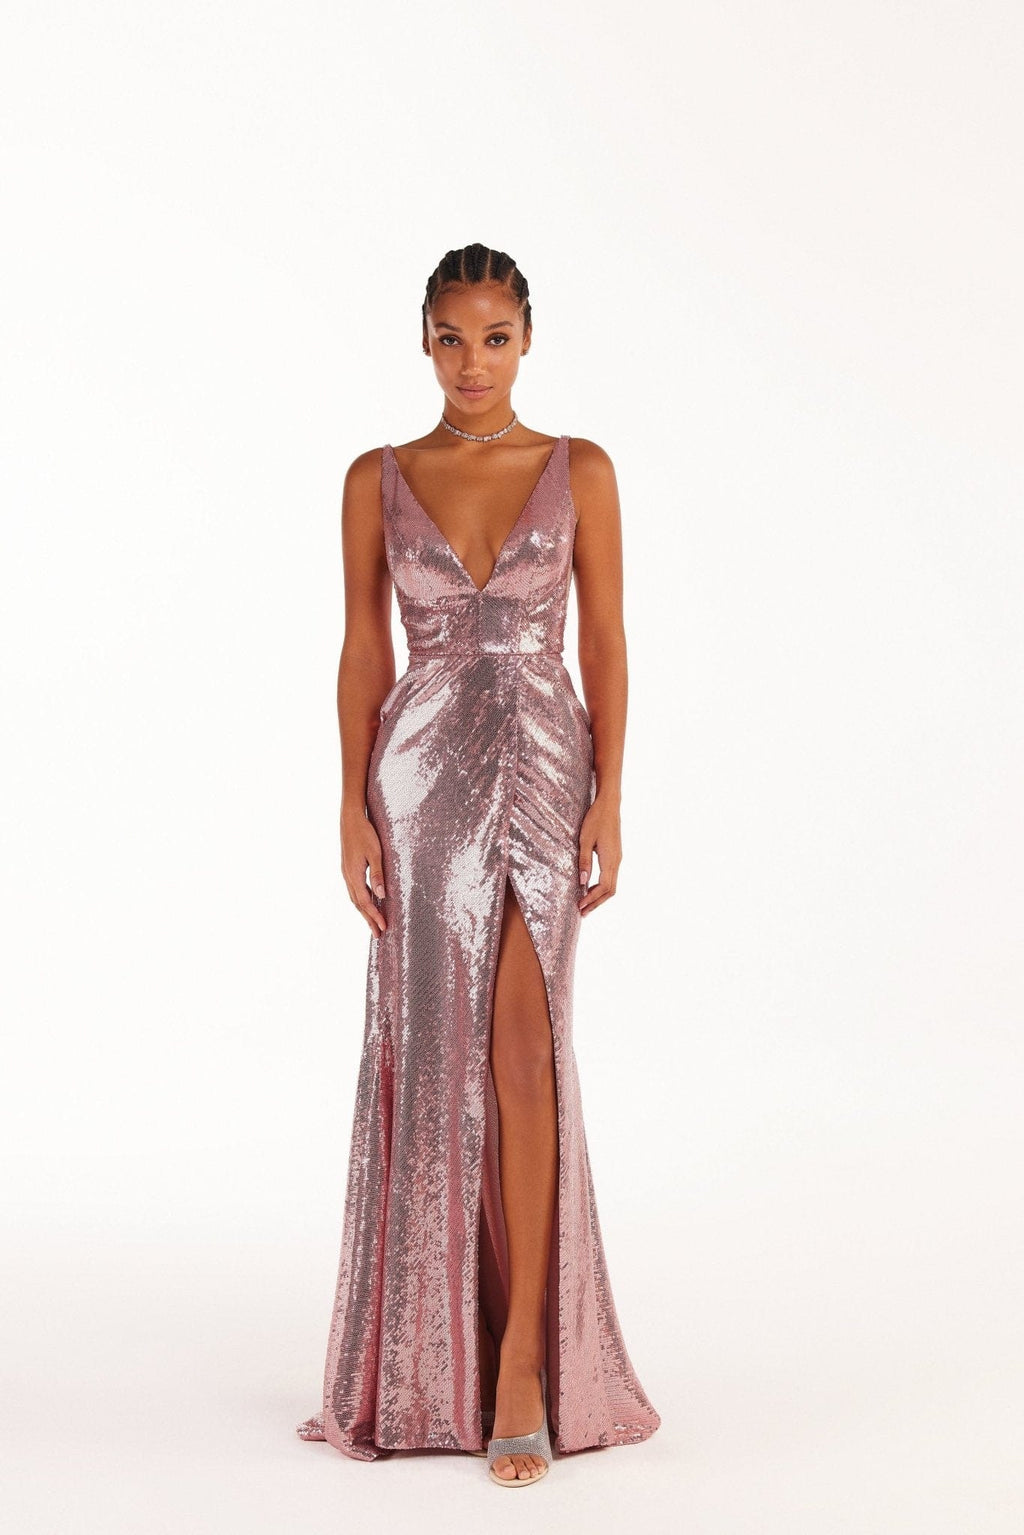 Breathtaking sequined rose maxi dress and gloves set - Milla